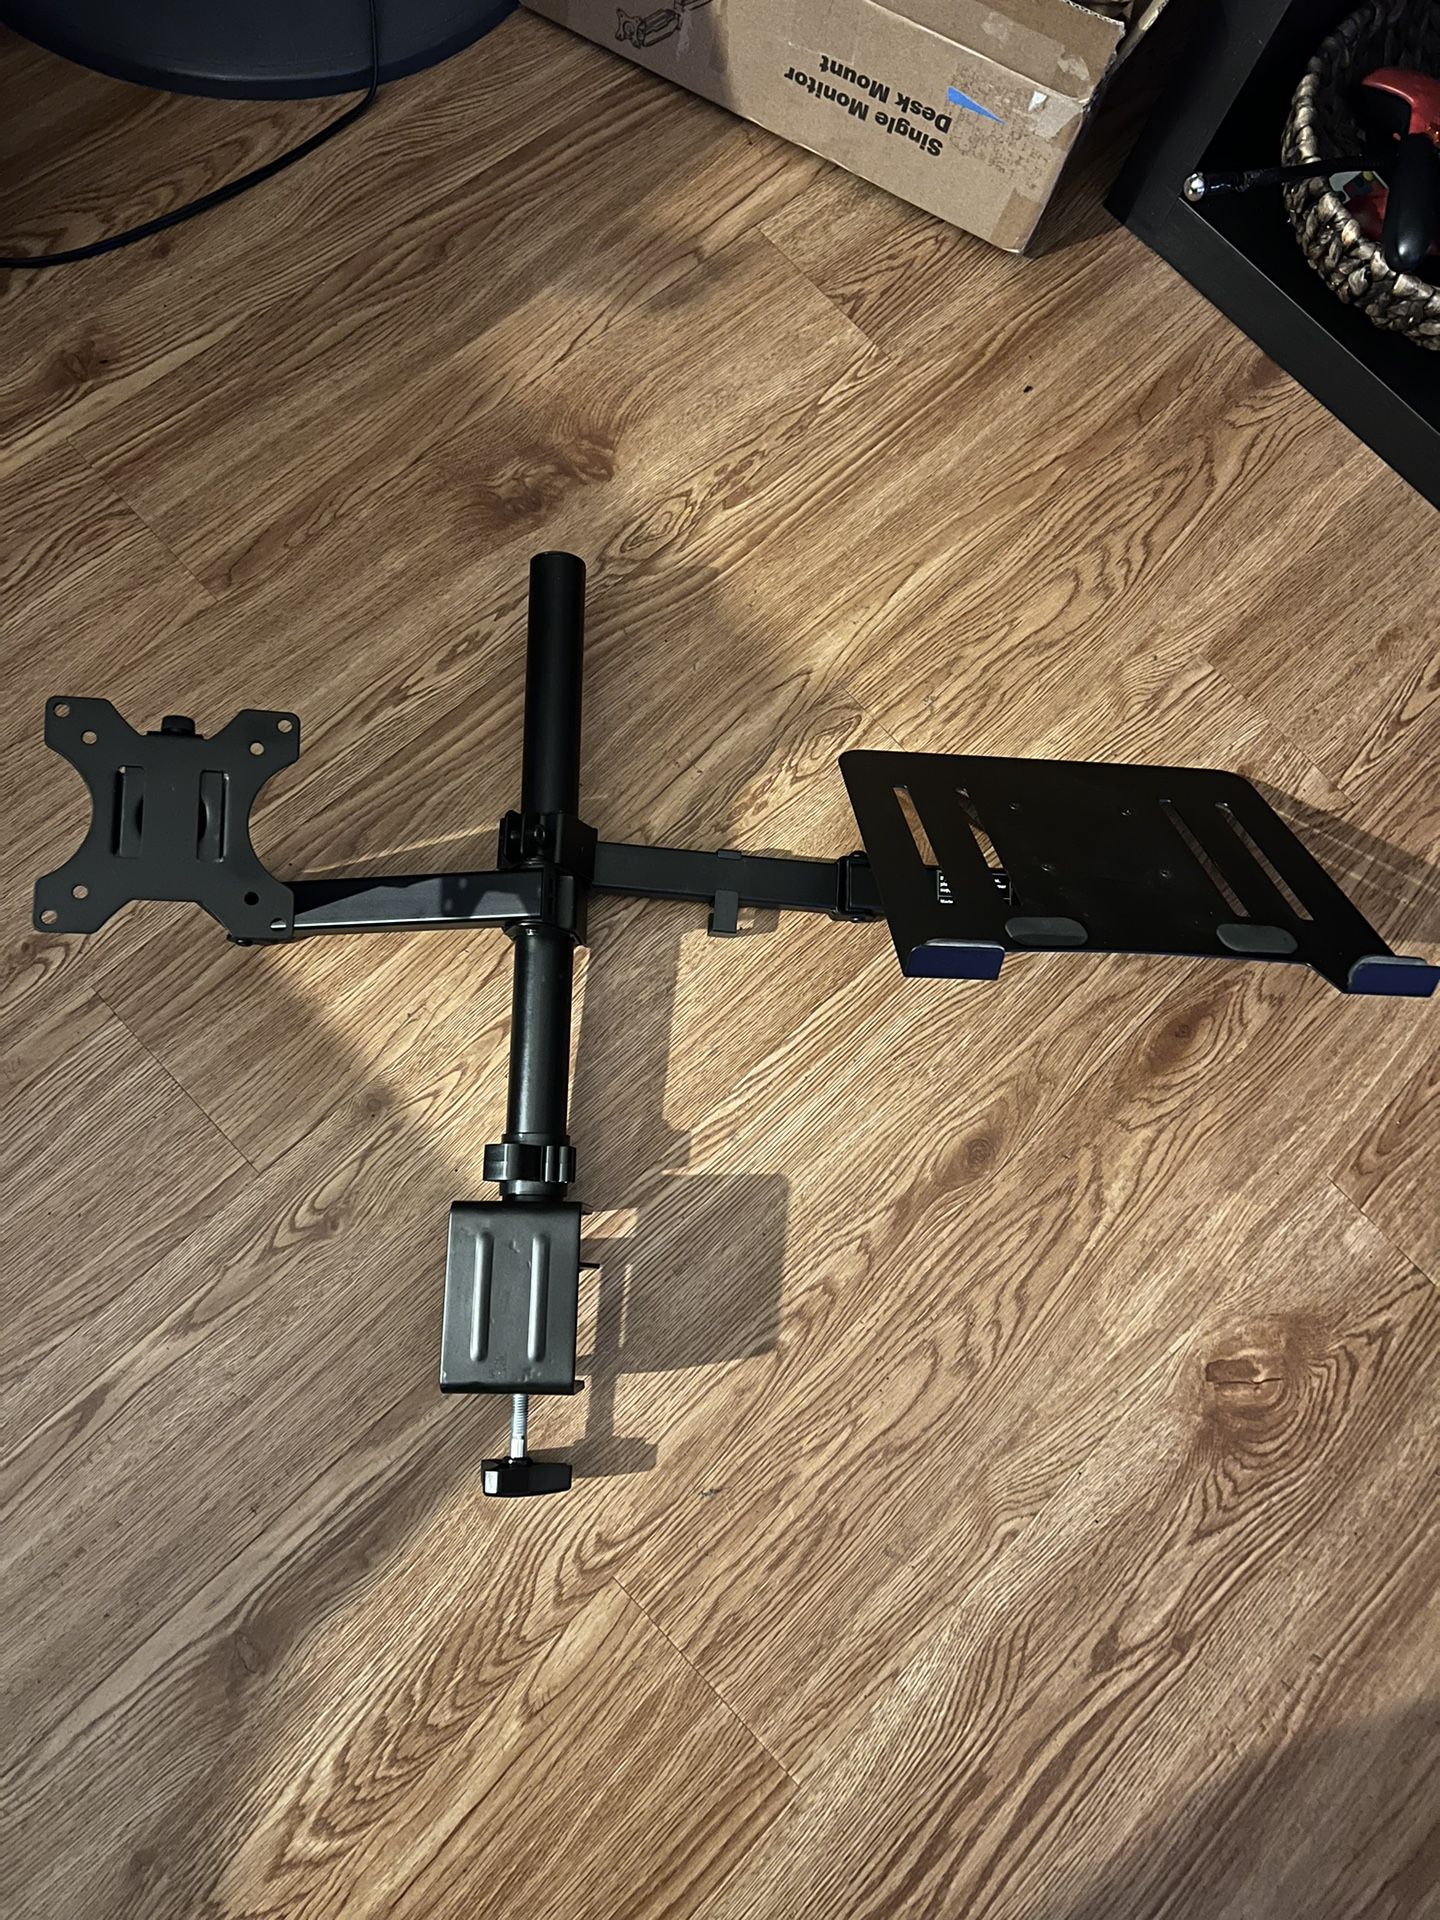 Monitor & Laptop Stand Arm